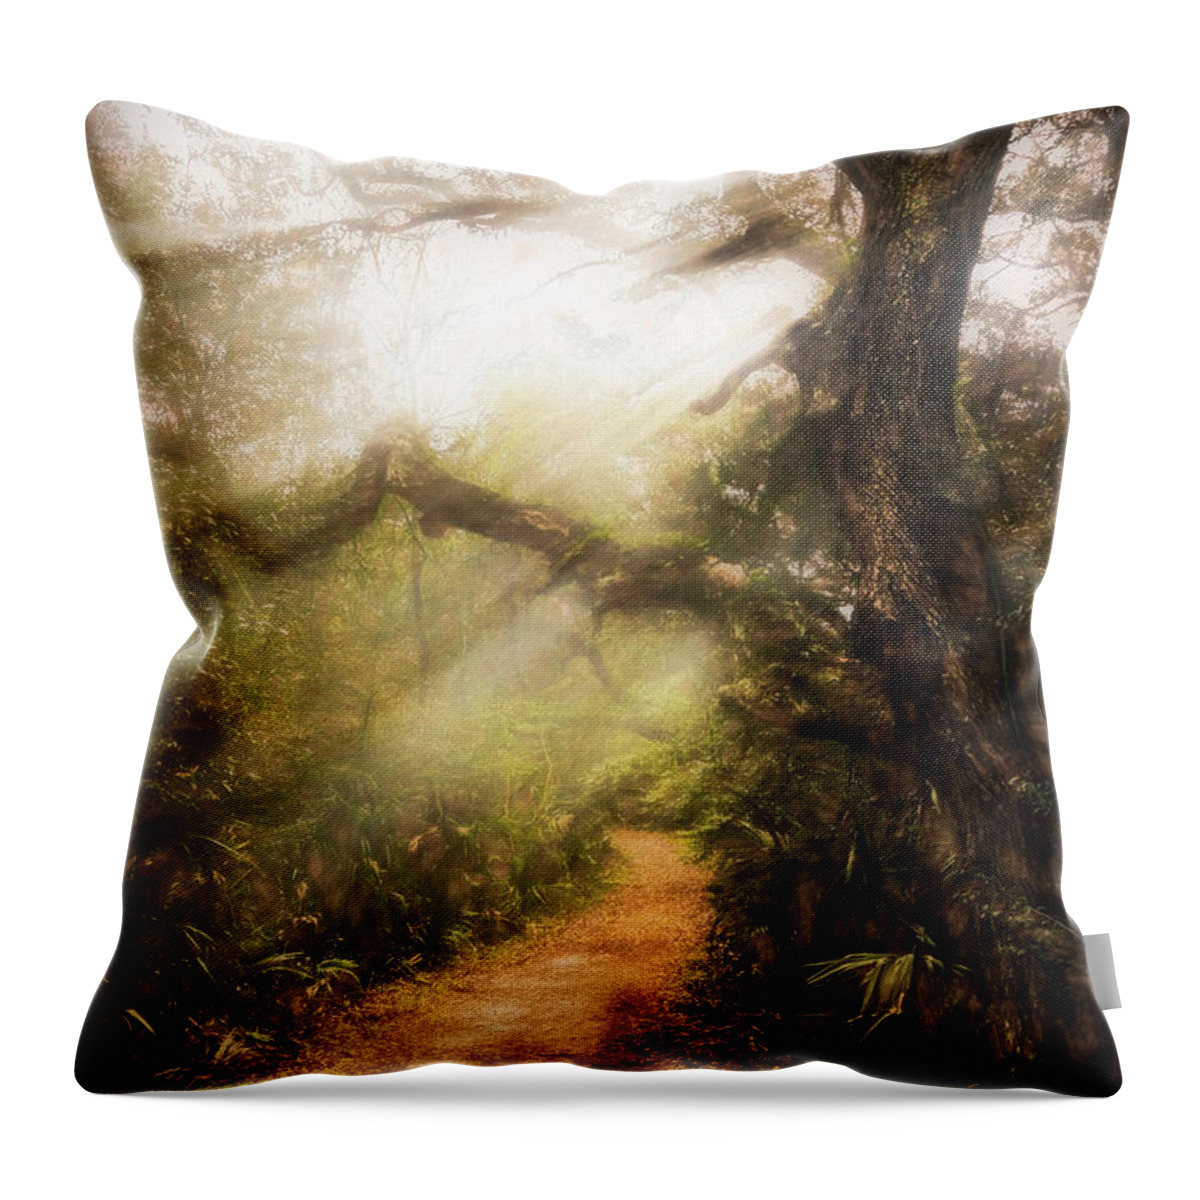 Trail Throw Pillow featuring the photograph Little Talbot Island Sunlit Trail Painting by Debra and Dave Vanderlaan